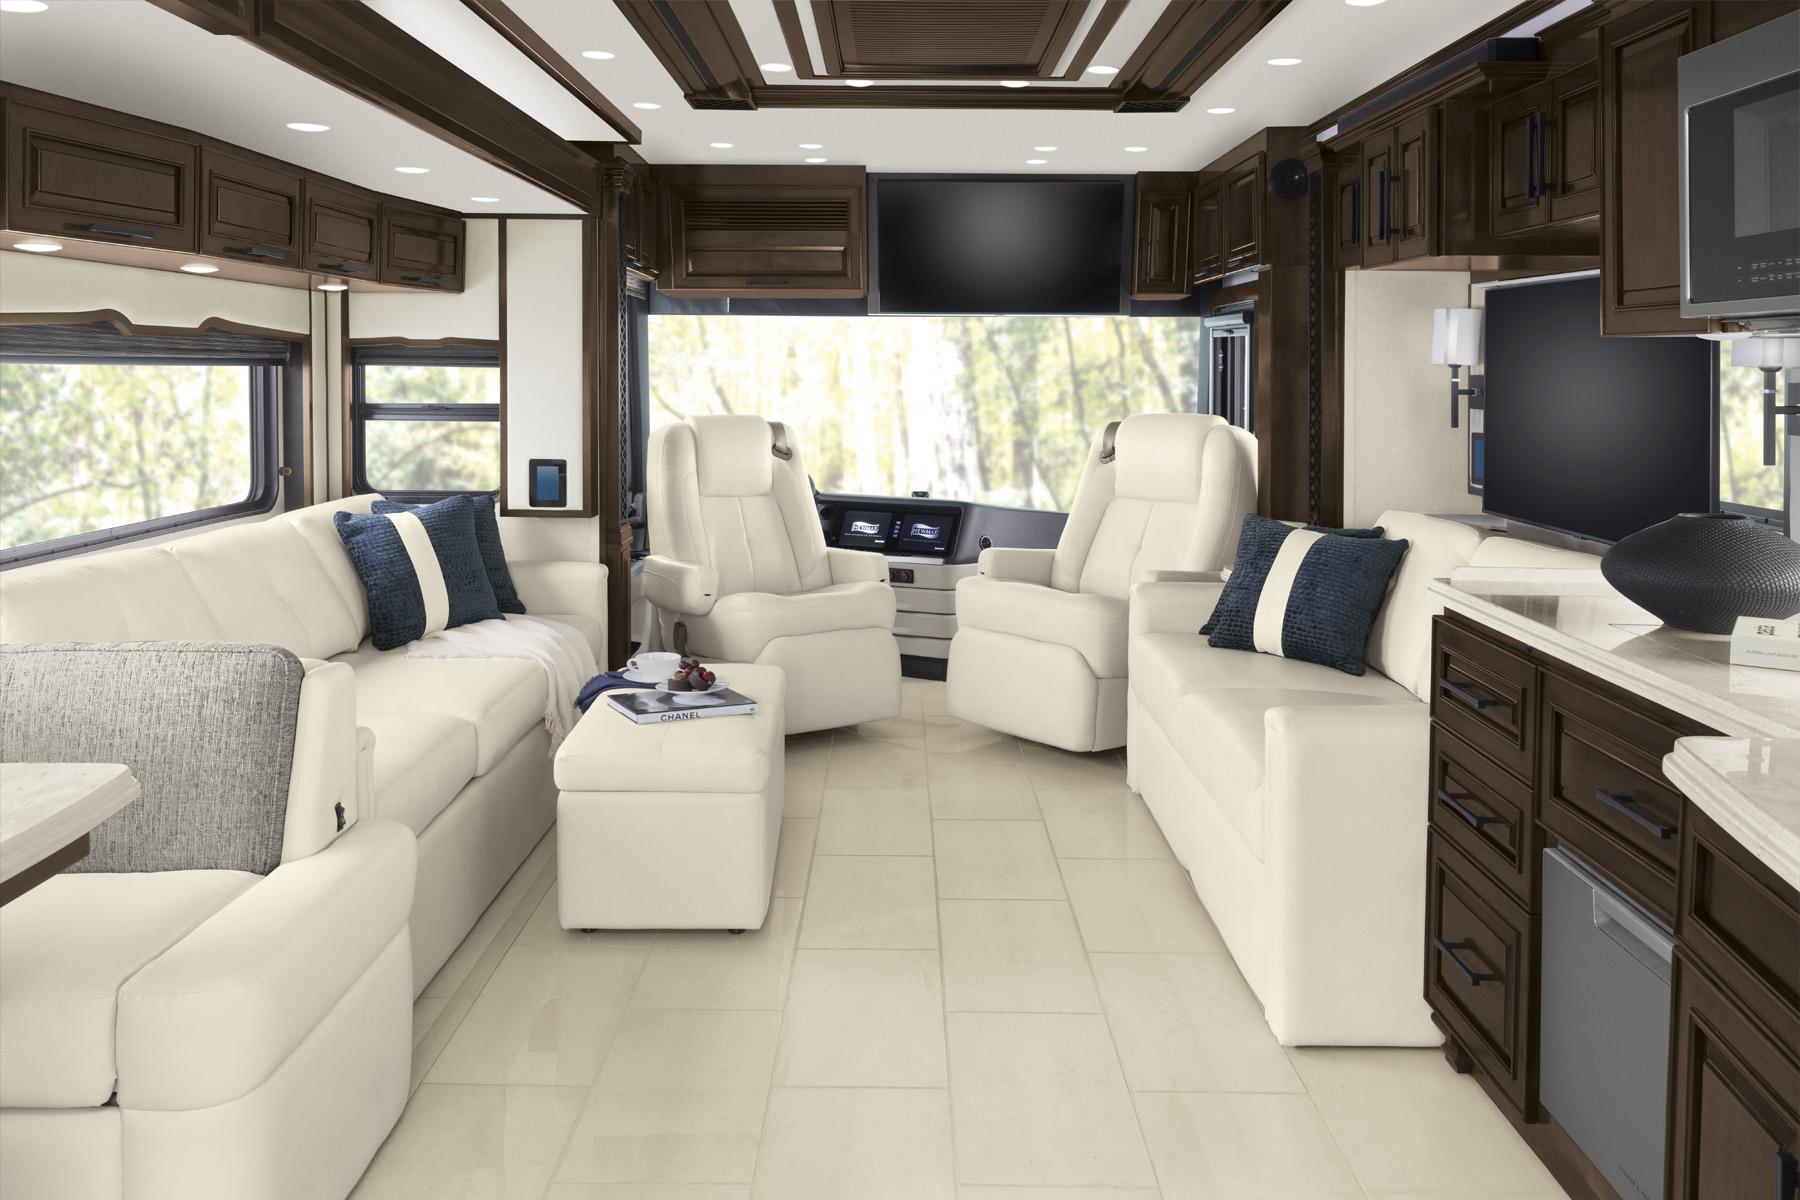 2024 London Aire motor coach gallery Newmar